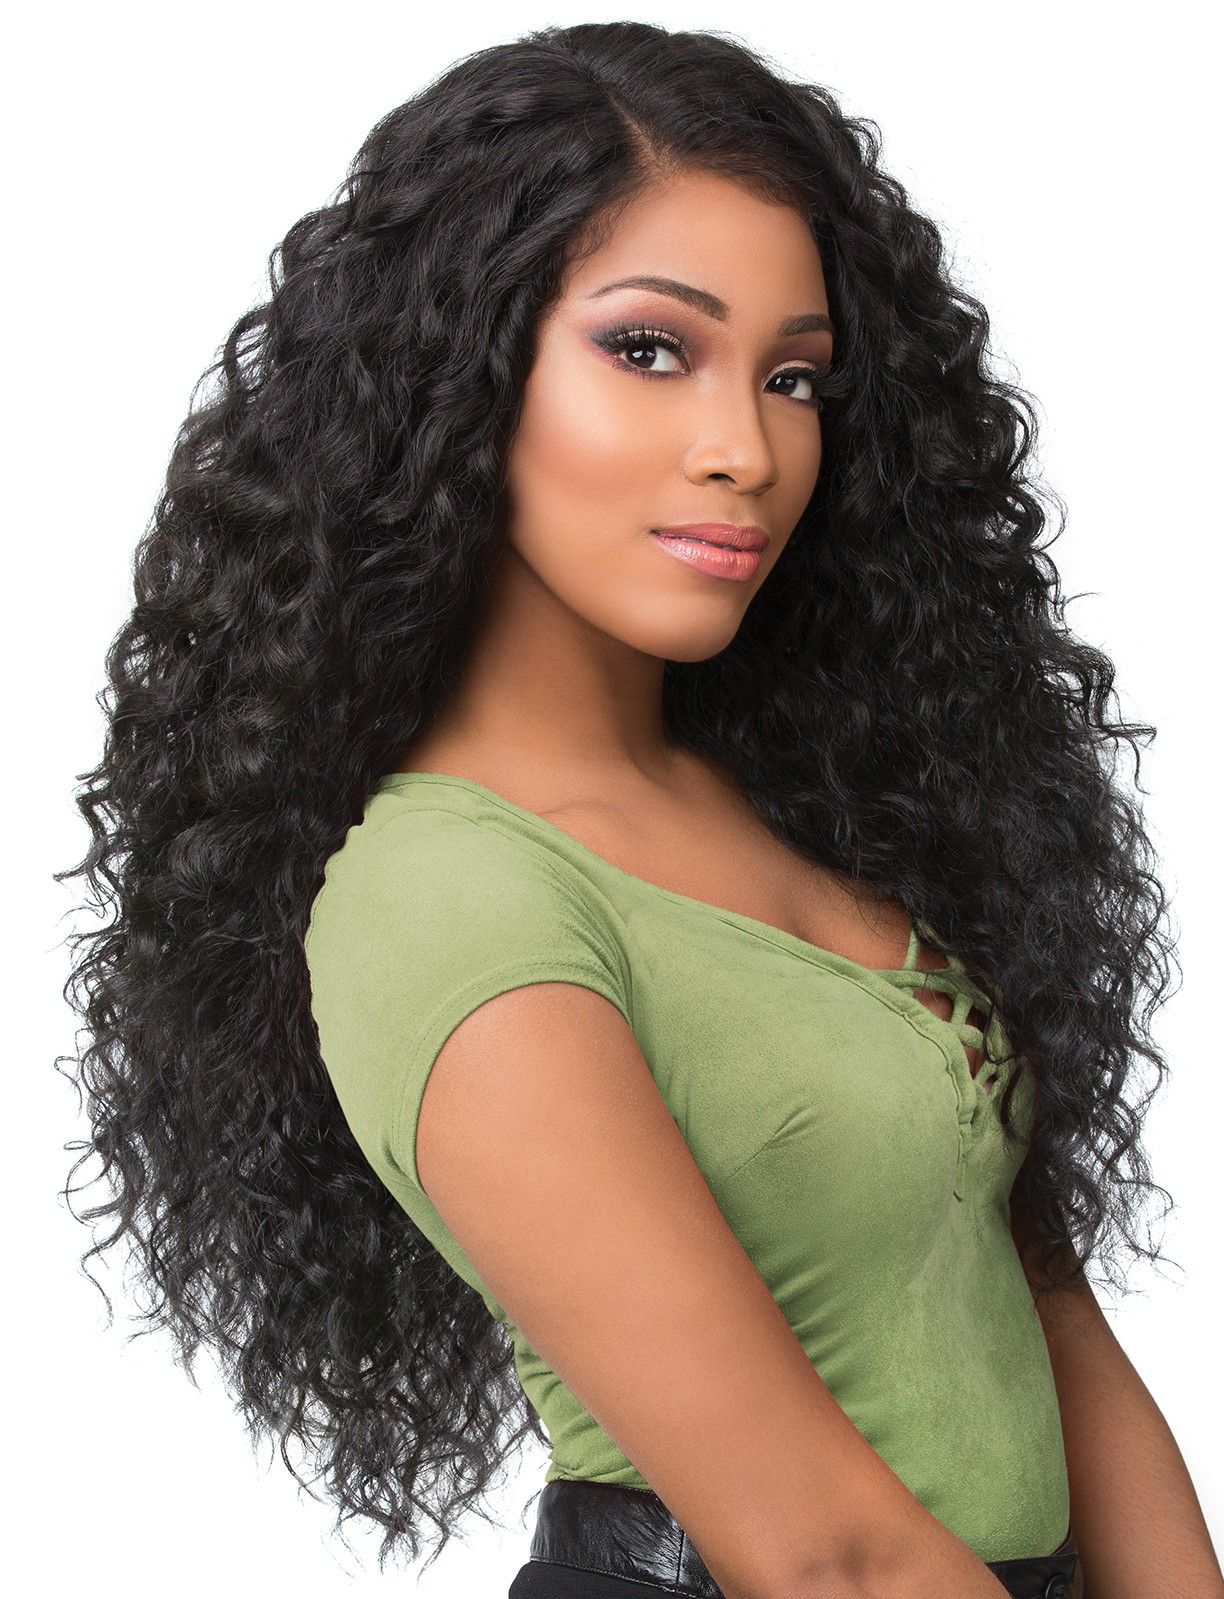 Locks of Luxury: Elevate Your Style with the Best Wigs